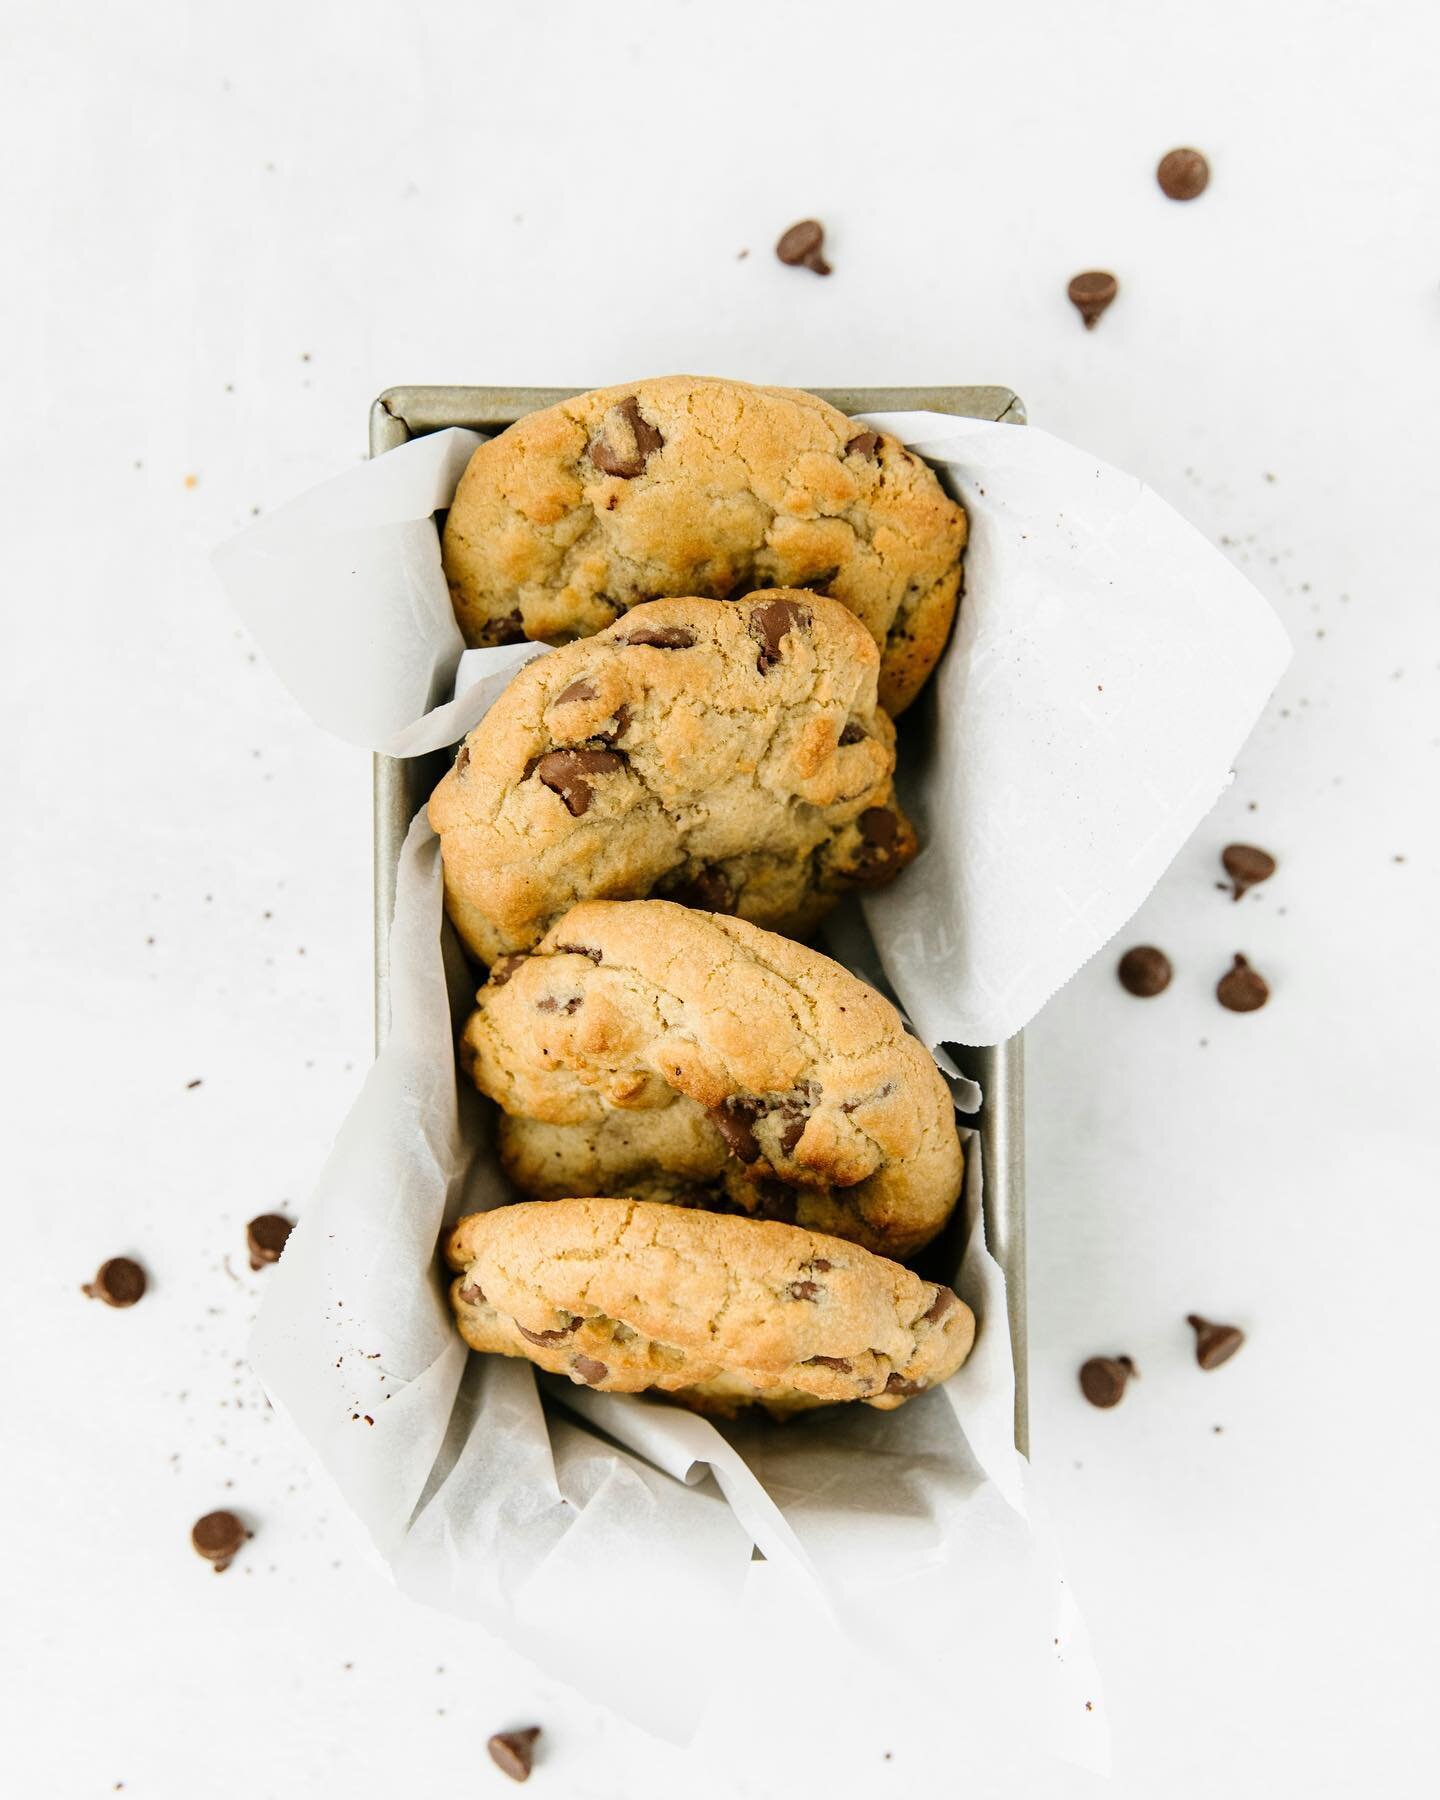 These Hormone Healthy Choclate Chip Cookies are perfect for when your craving something sweet and healthy. Packed with protein, healthy fats and fiber, these cookies will keep your blood sugar balanced and hormones happy.

Full recipe below! 

Ingred